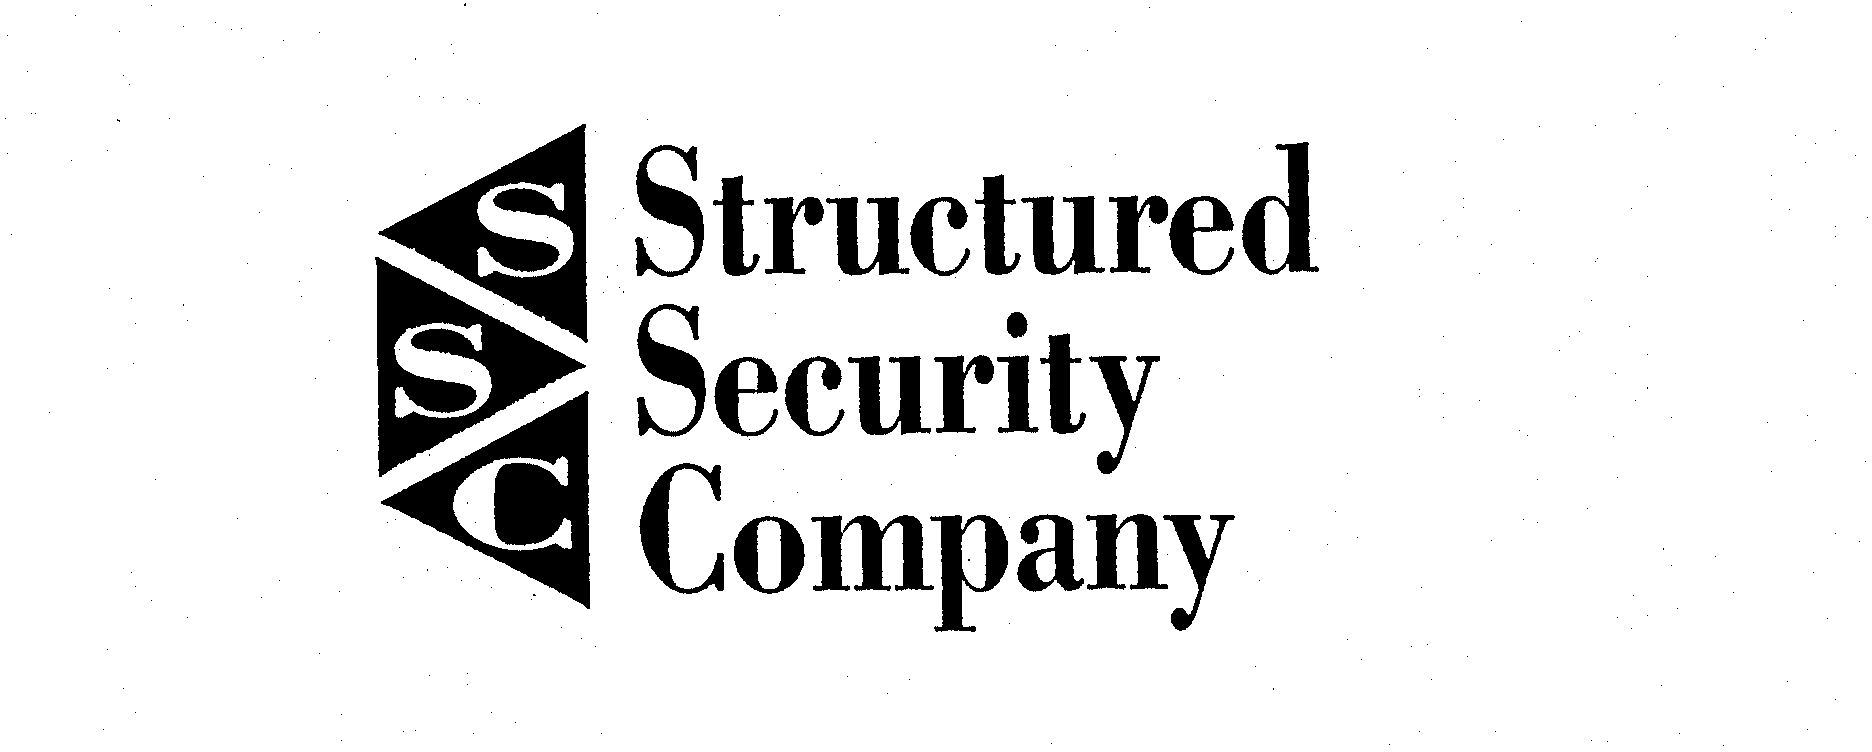  SSC STRUCTURED SECURITY COMPANY